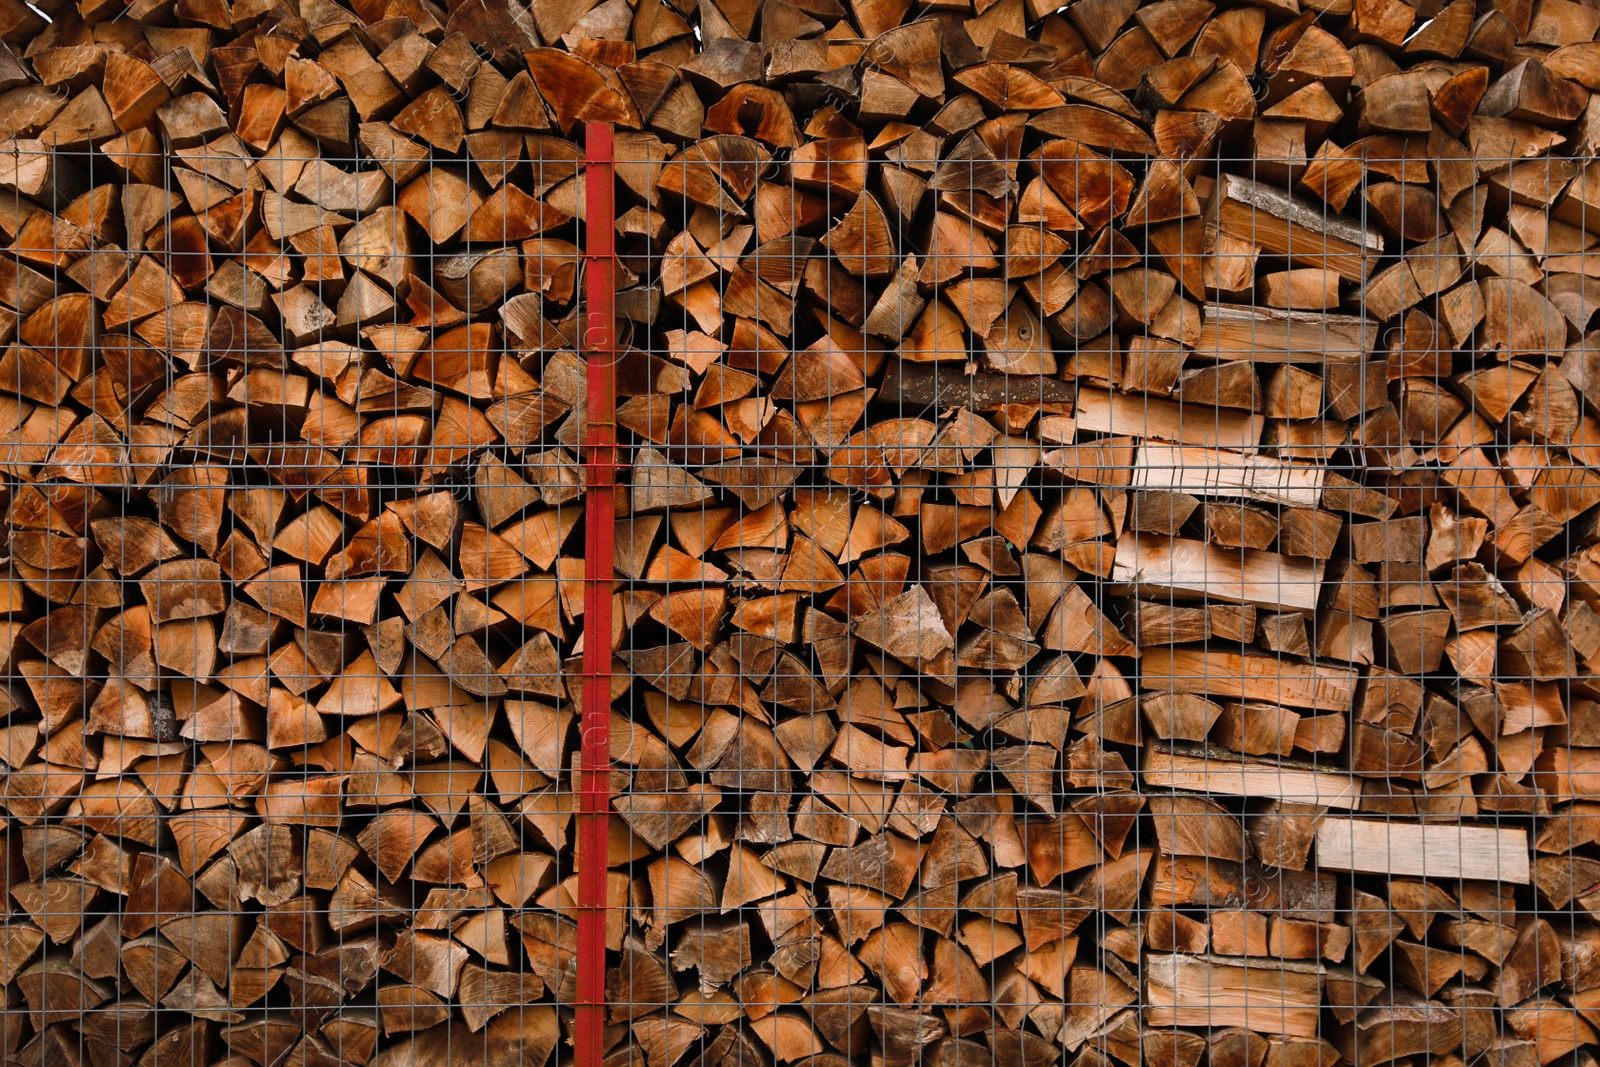 Photo of Stacked firewood as background. Heating house in winter